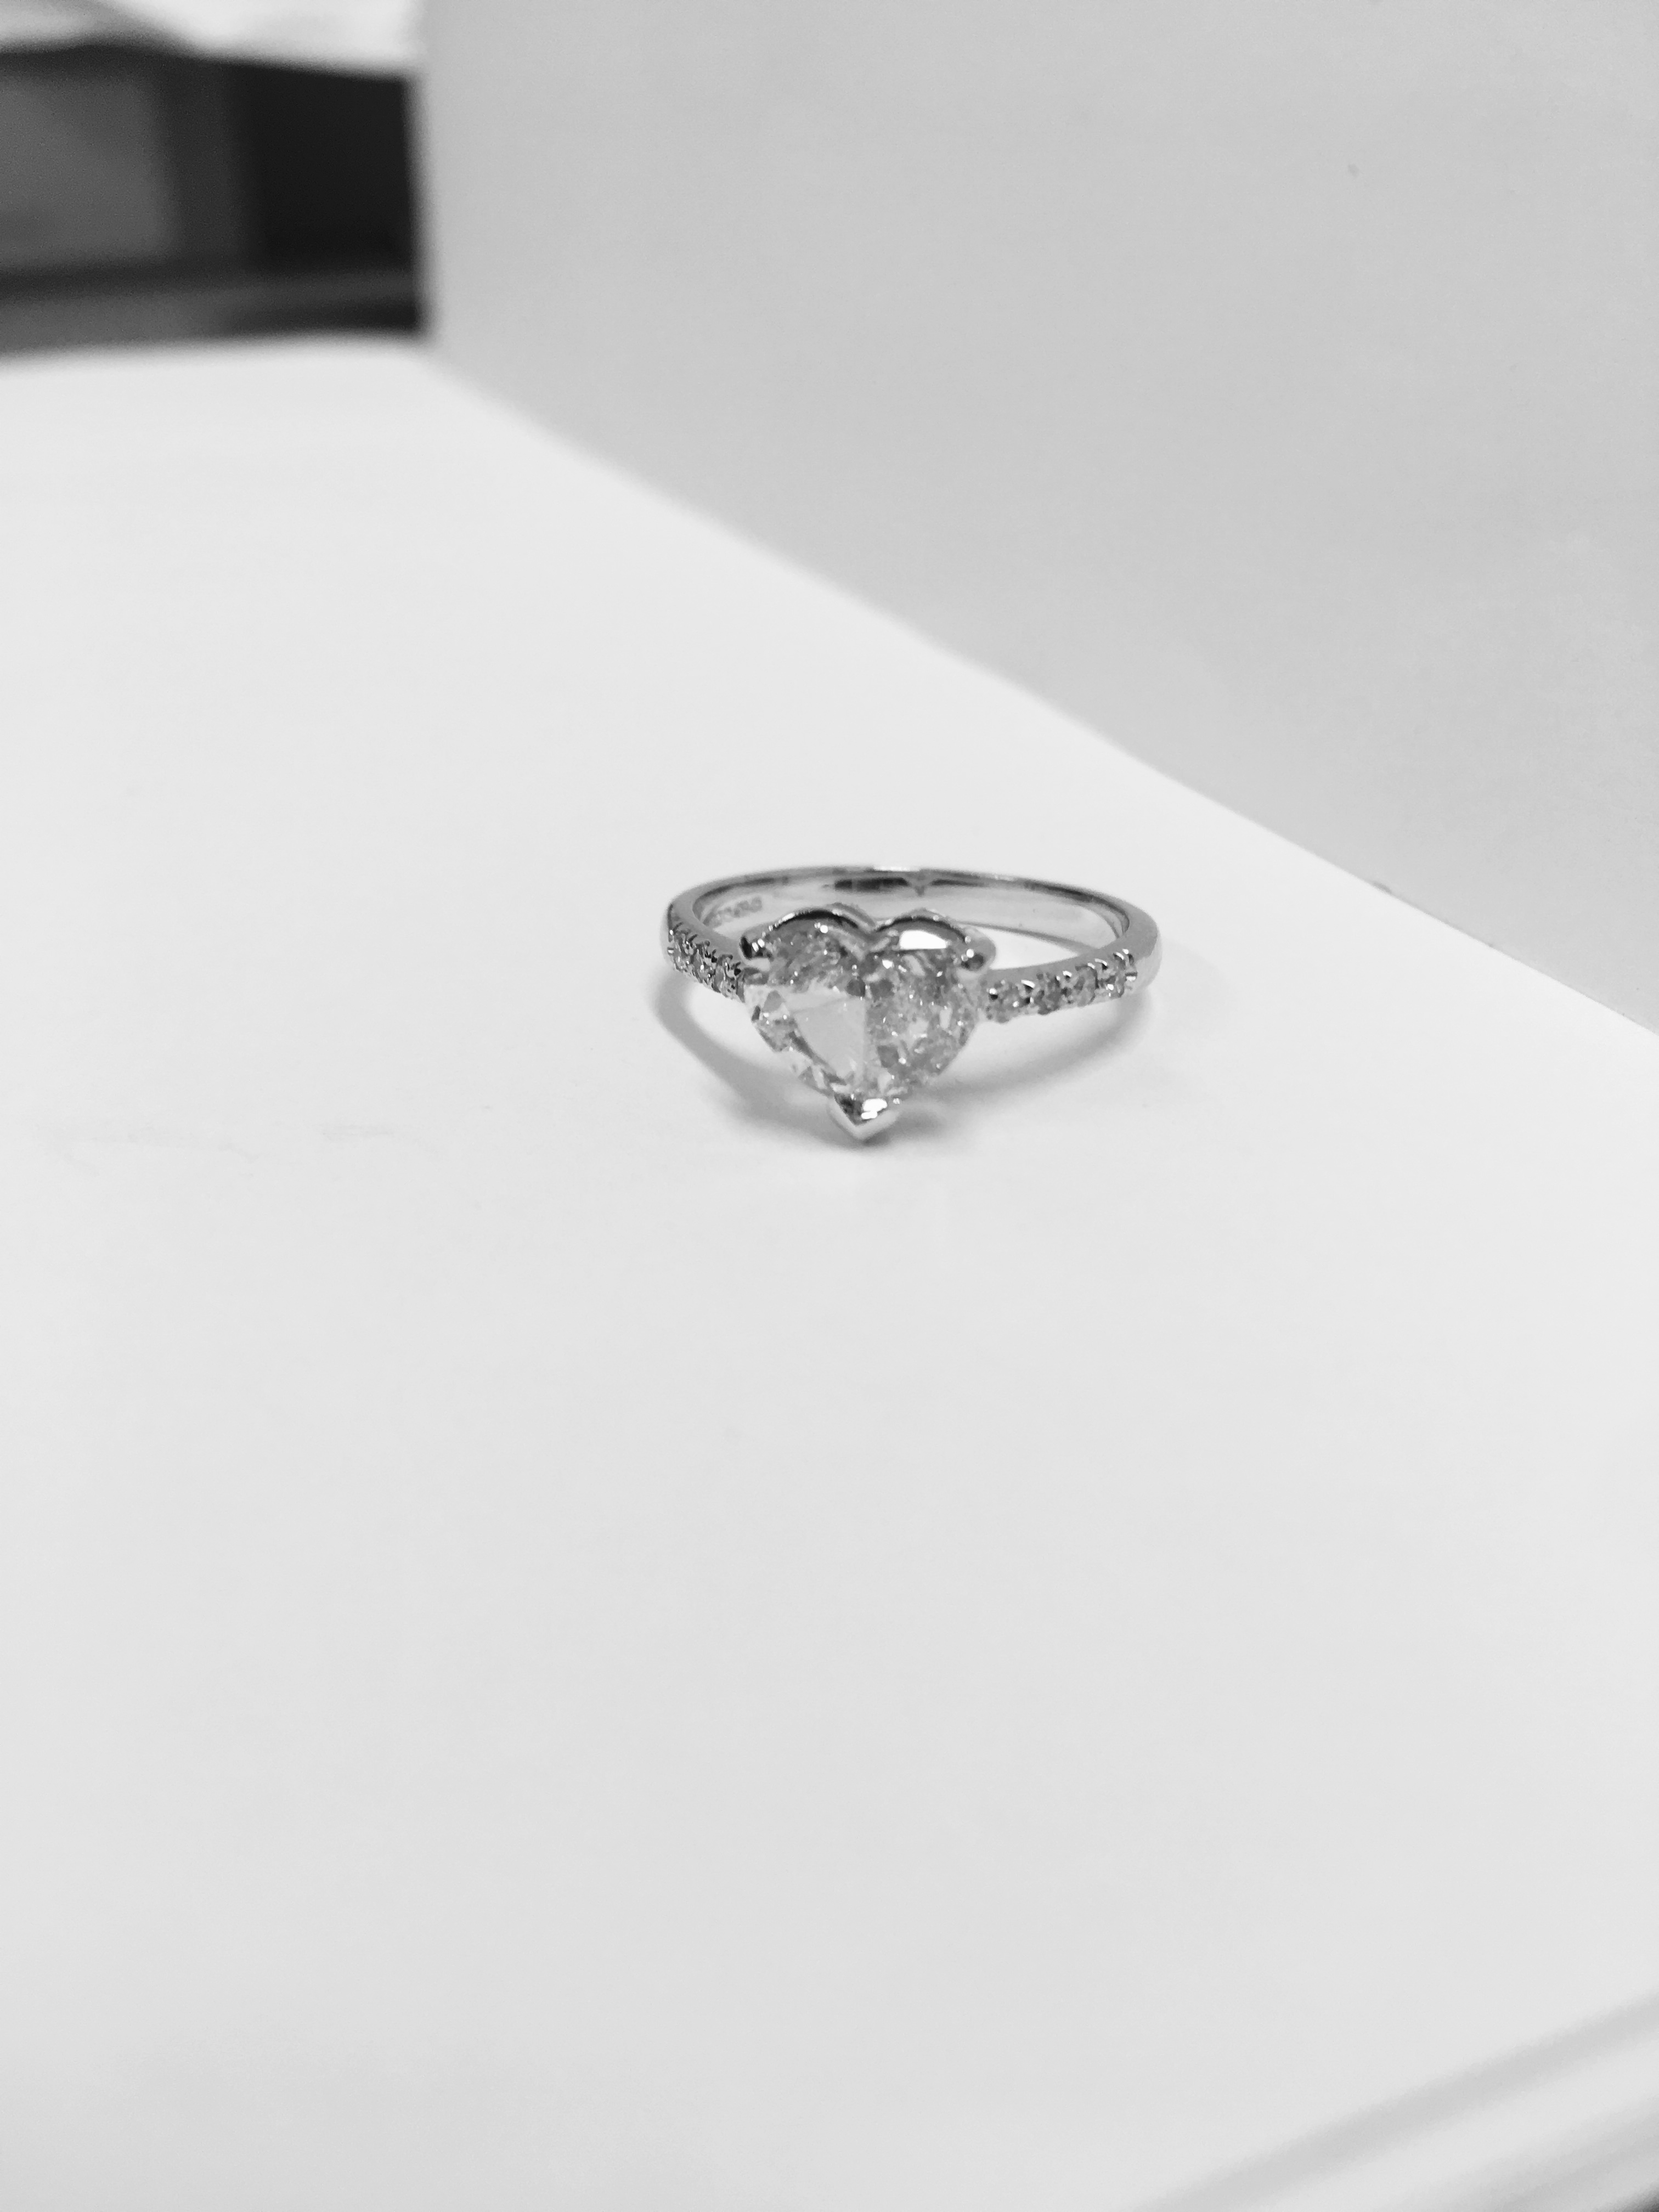 1Ct Heart Shape Diamond Solitaire Ring, - Image 5 of 6